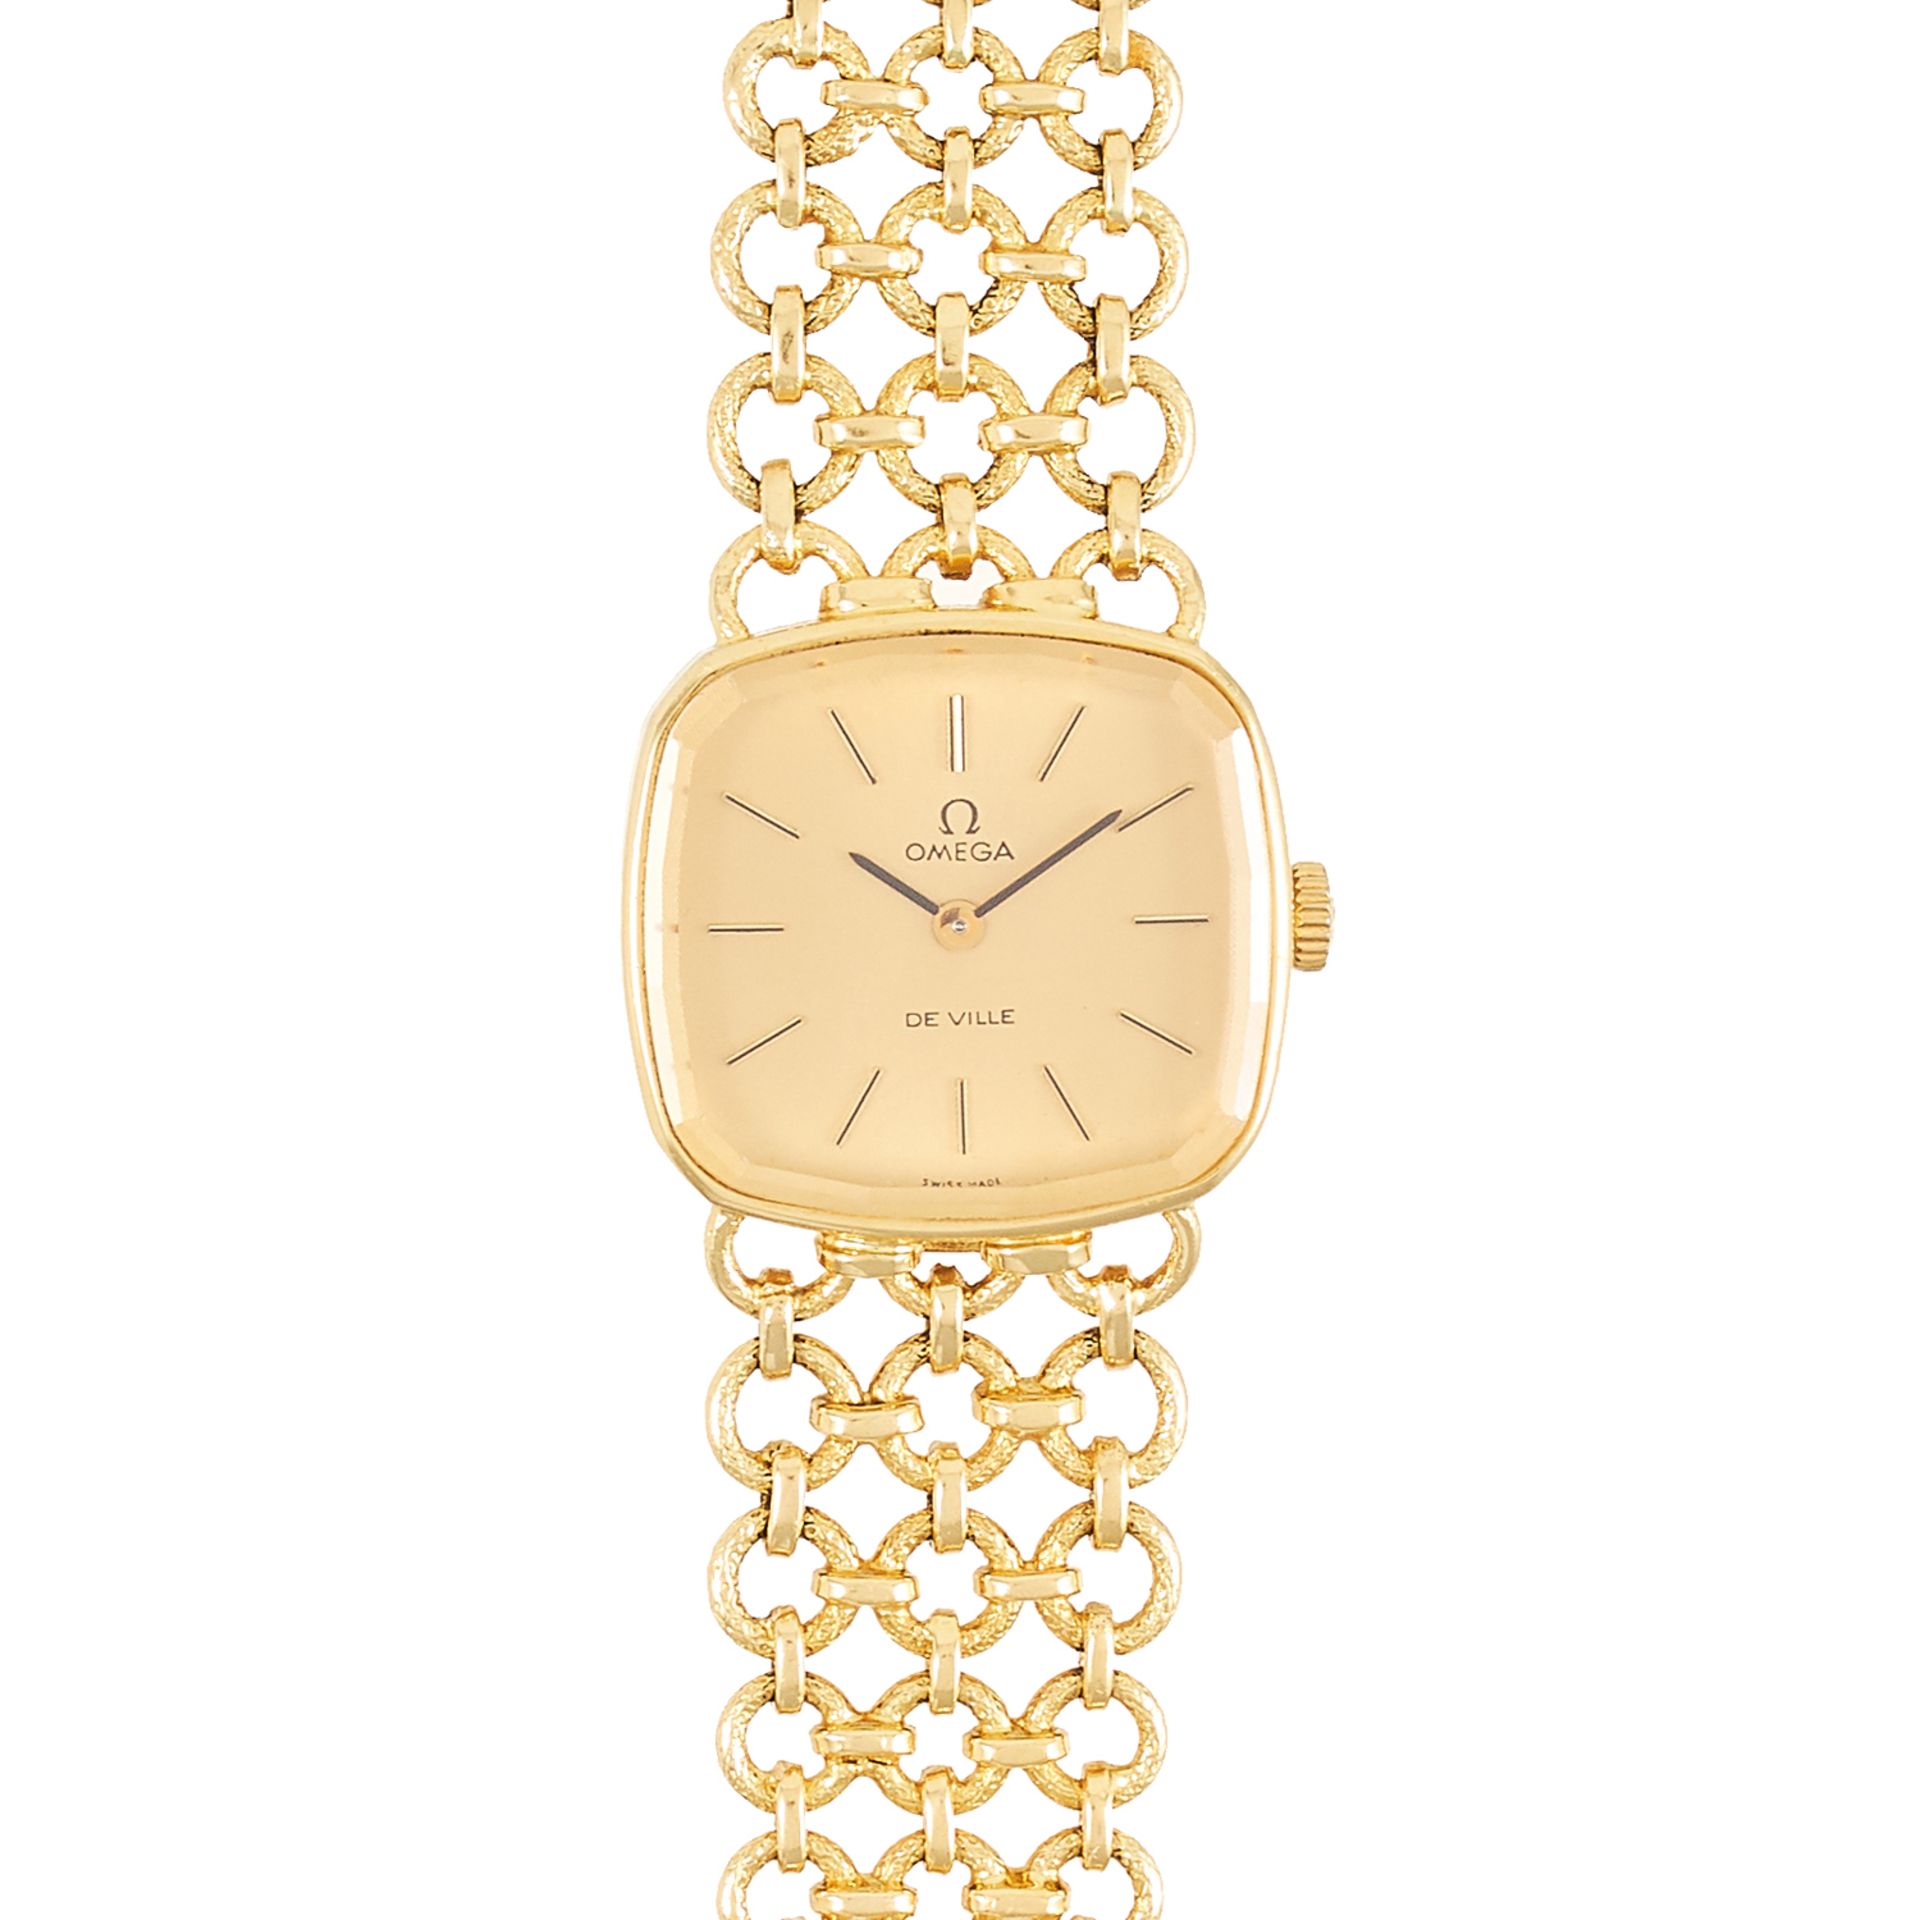 A LADIES OMEGA DE VILLE WRIST WATCH in 18ct yellow gold, the cushion shaped face within a circular - Bild 2 aus 2